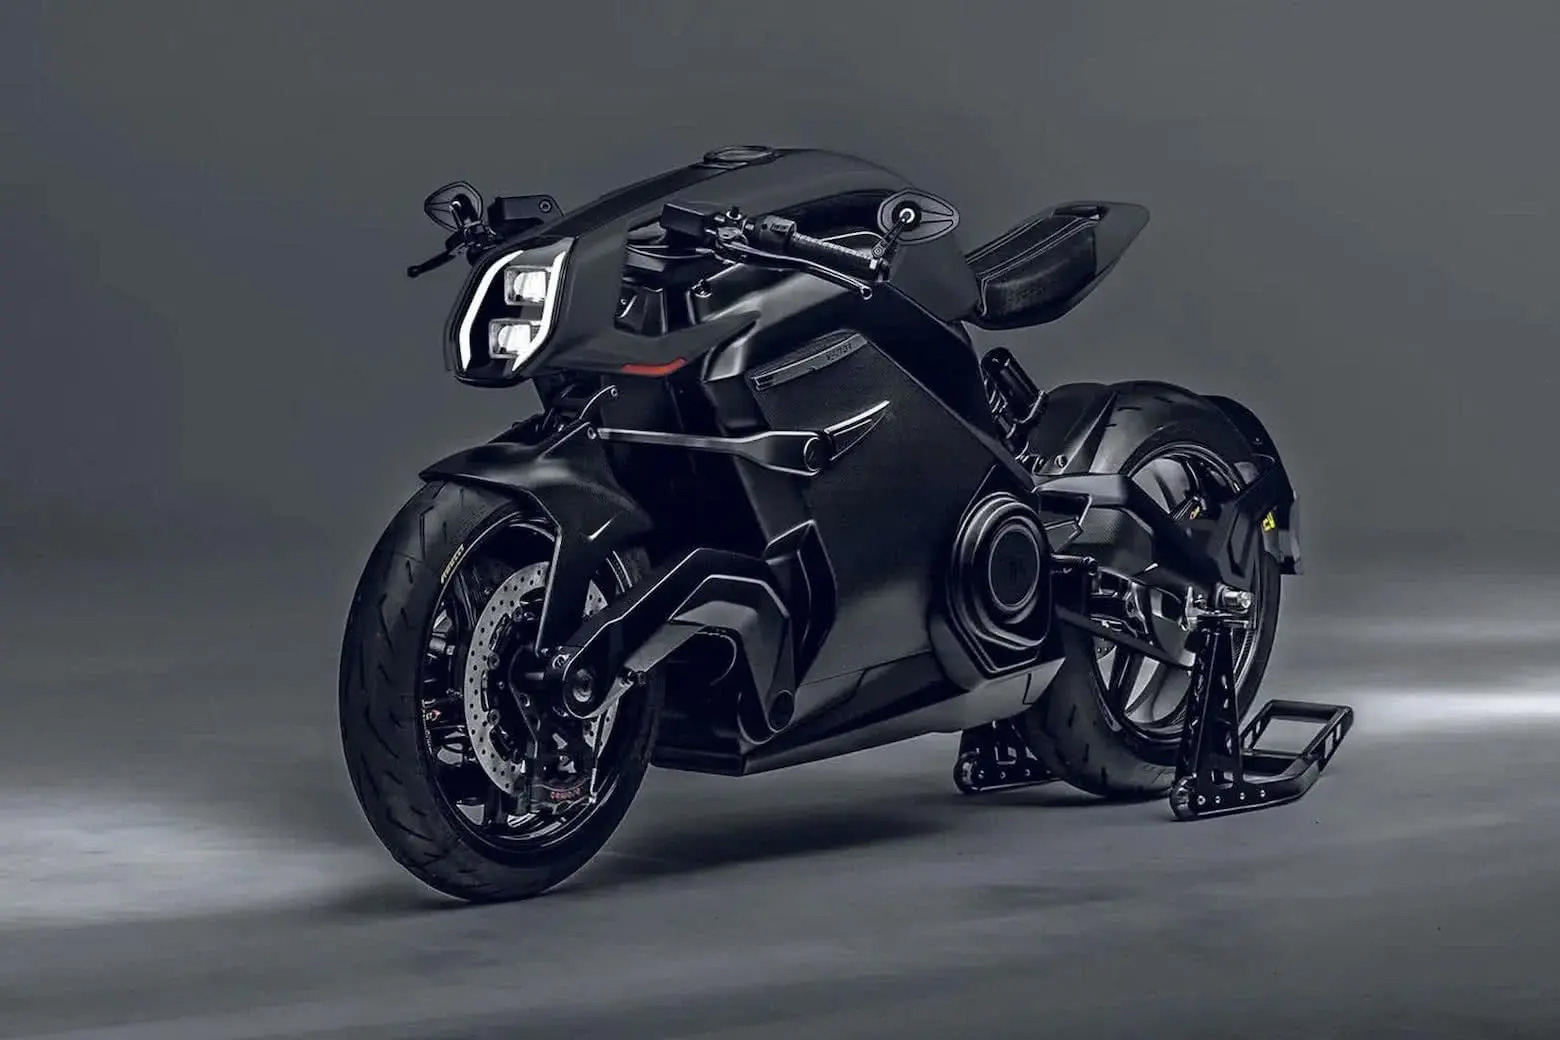 An Arc Vector electric motorcycle